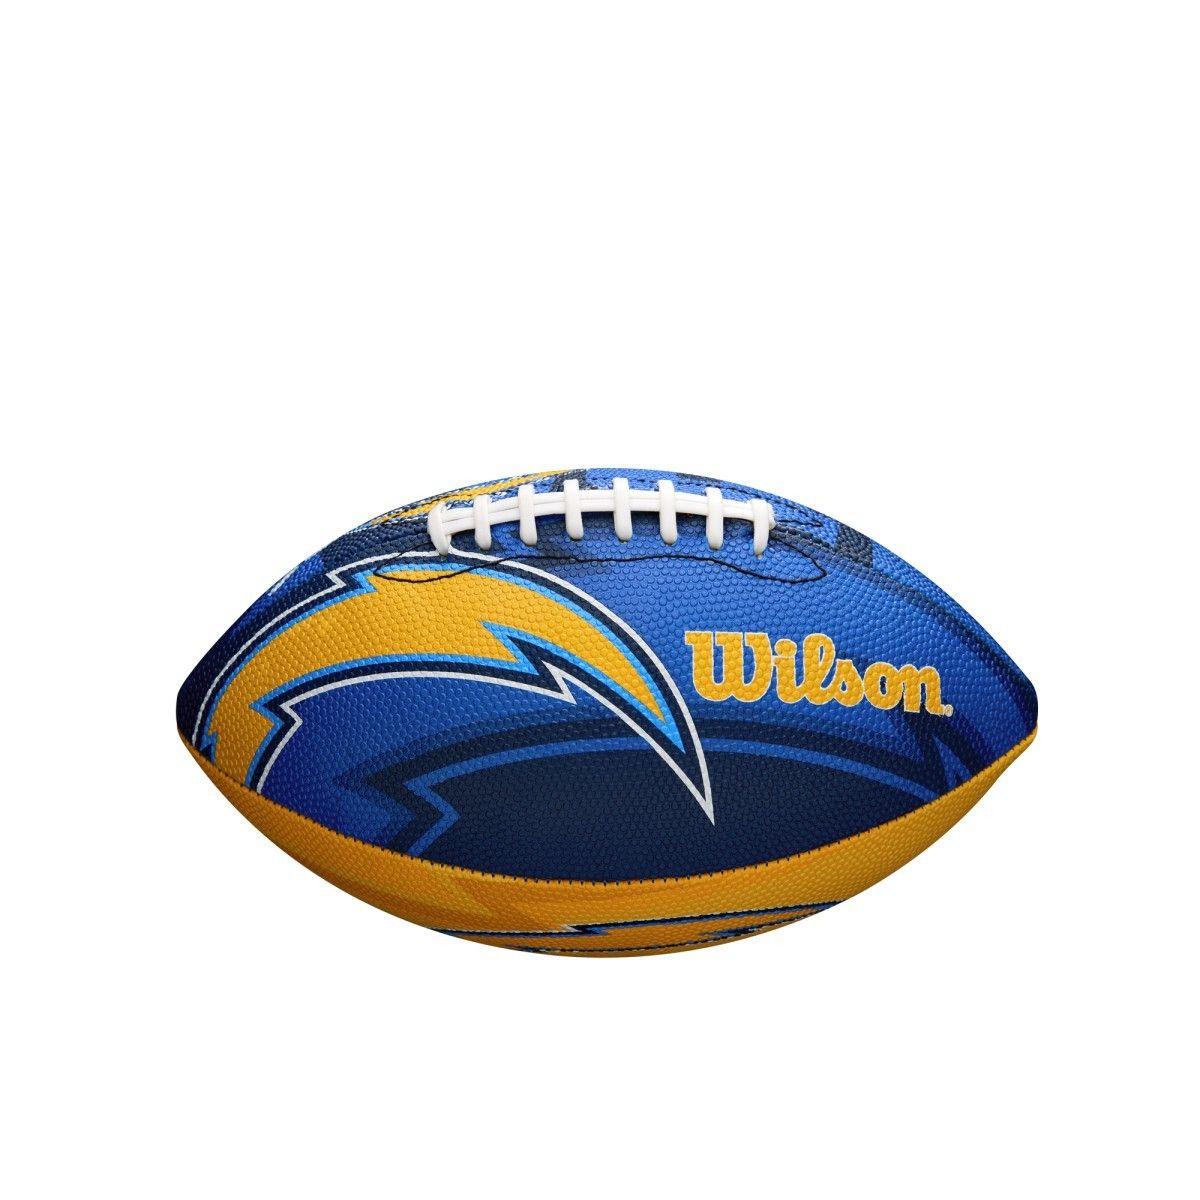 Chargers Football Logo - NFL Team Logo Junior Size Football Angeles Chargers. Wilson